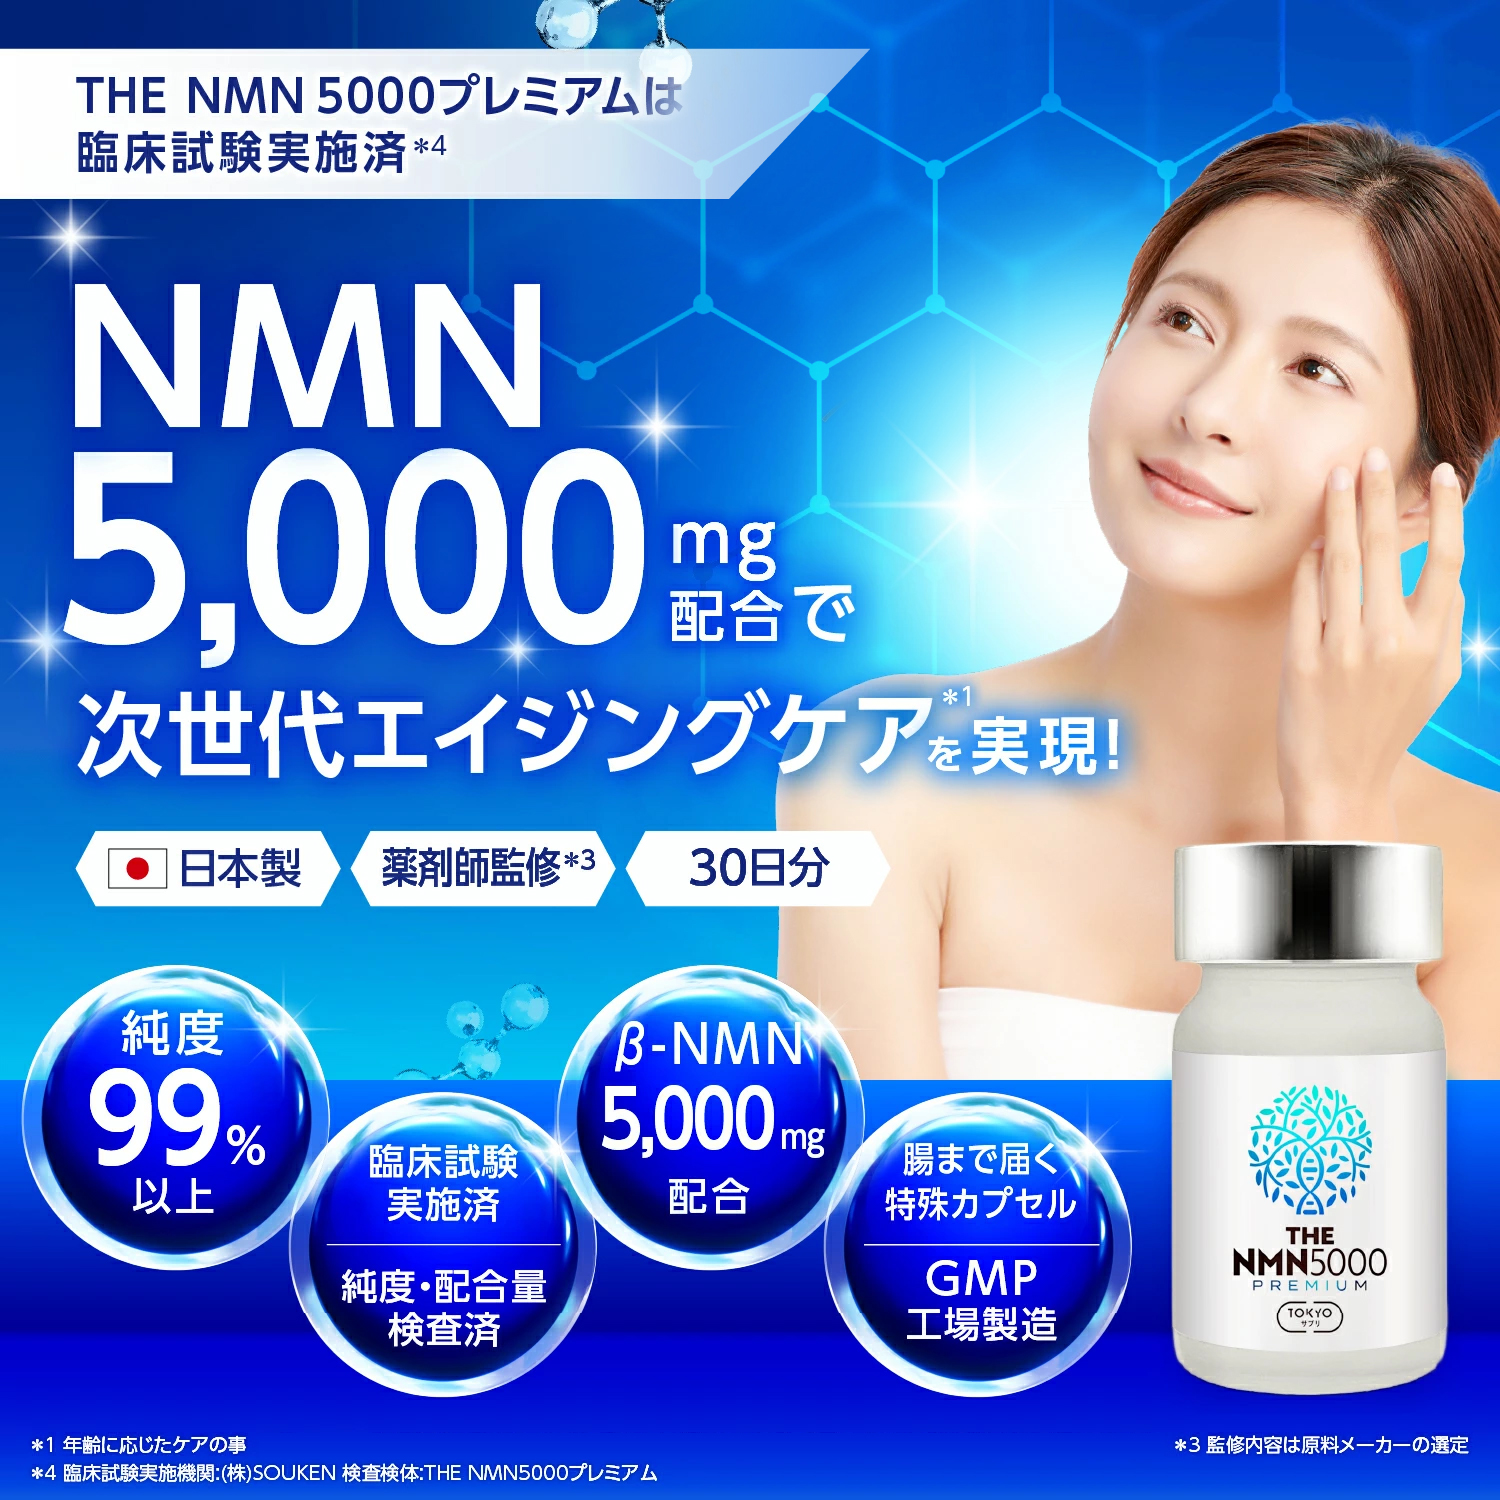 NMN 5000mg premium purity 99% and more . floor examination execution made in Japan pharmacist ... till reach small size special Capsule GMP recognition factory 30 day minute TOKYO supplement 